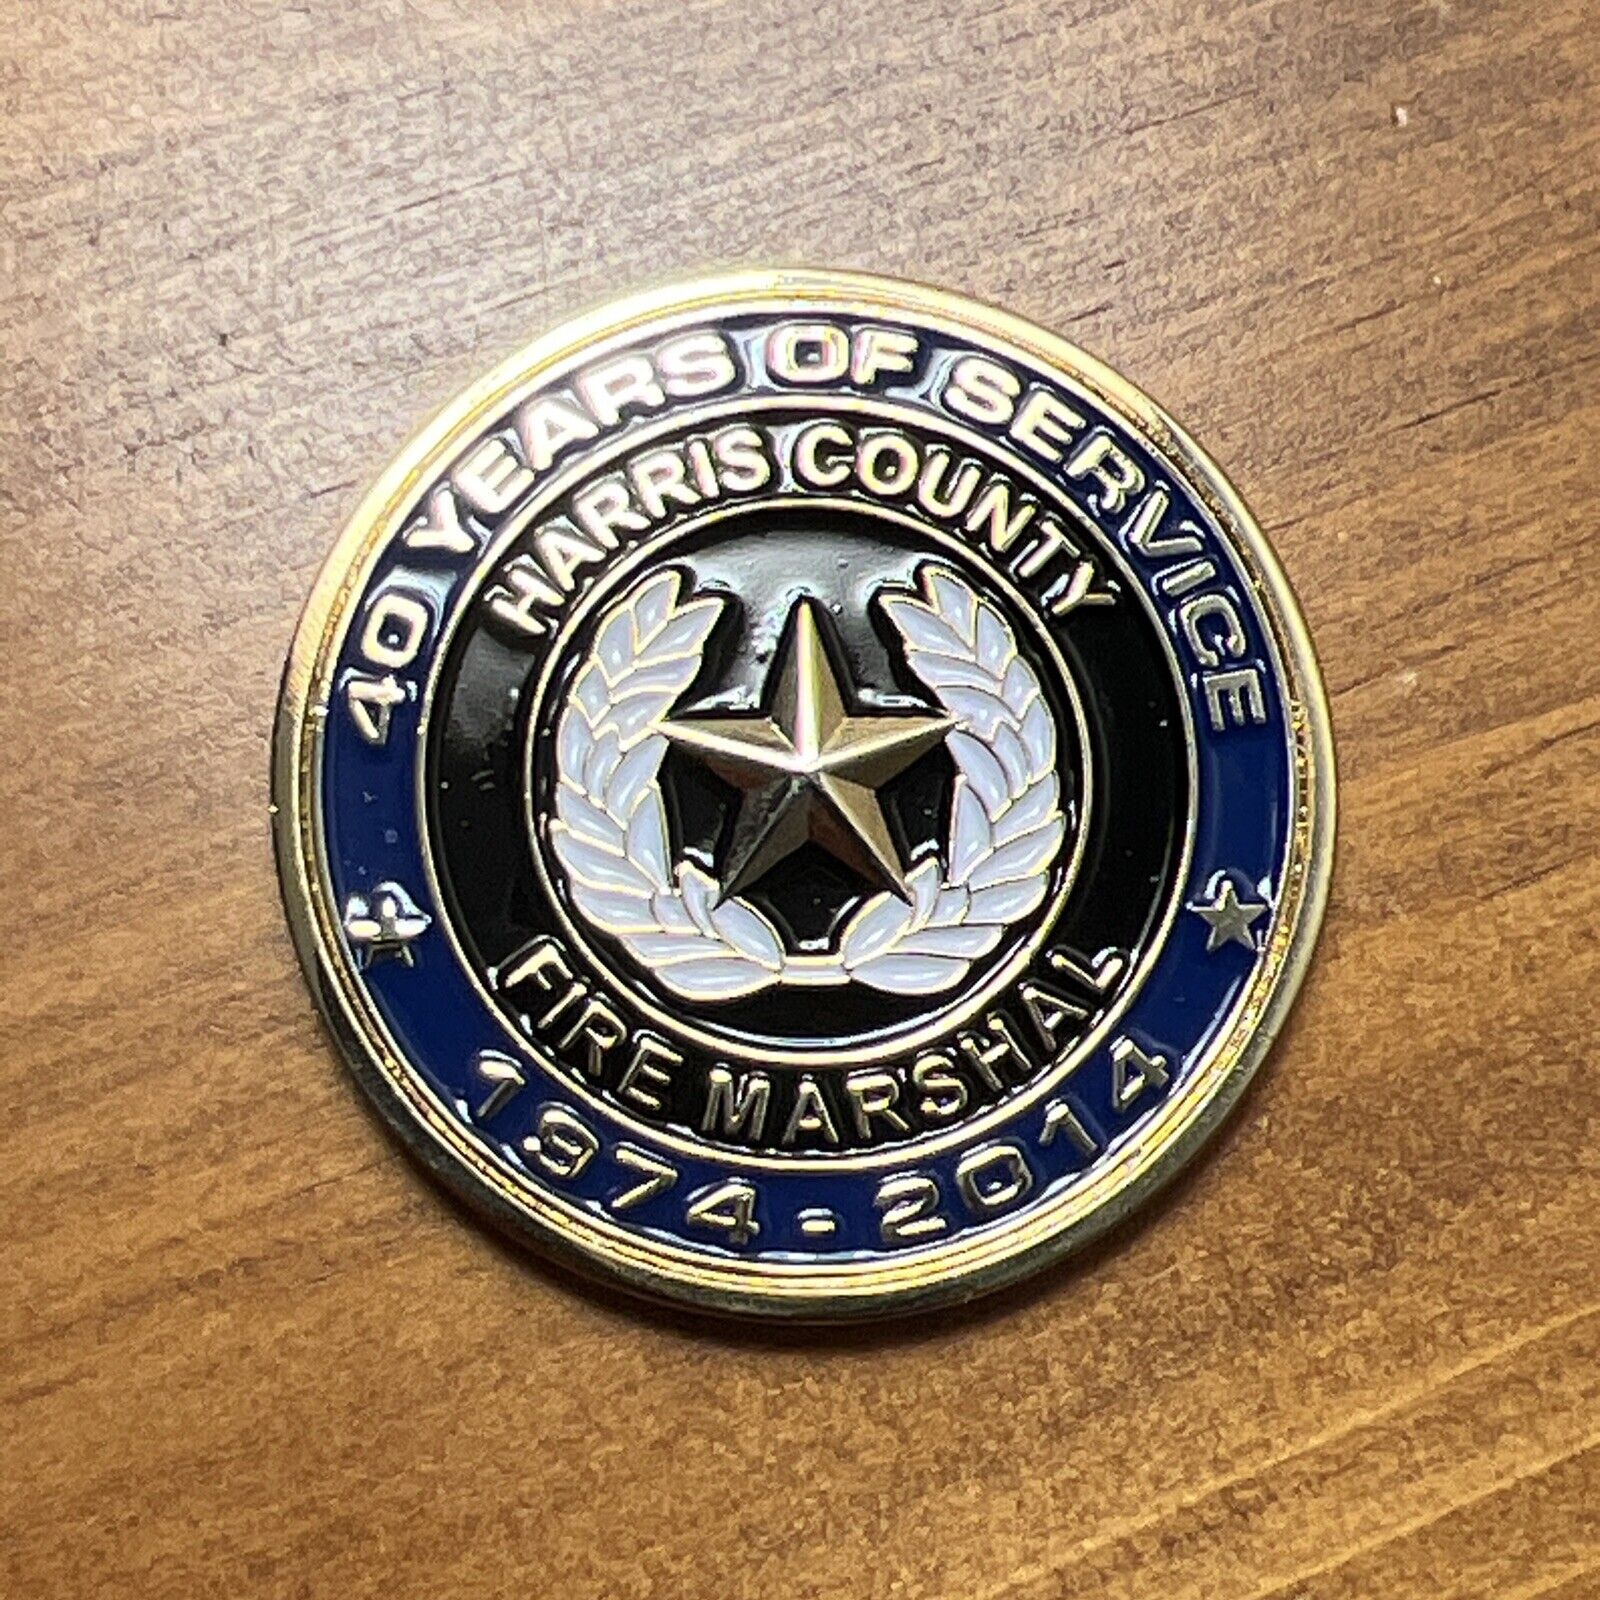 Harris County Fire Marshal State of Texas Challenge Coin 40 Years of Service